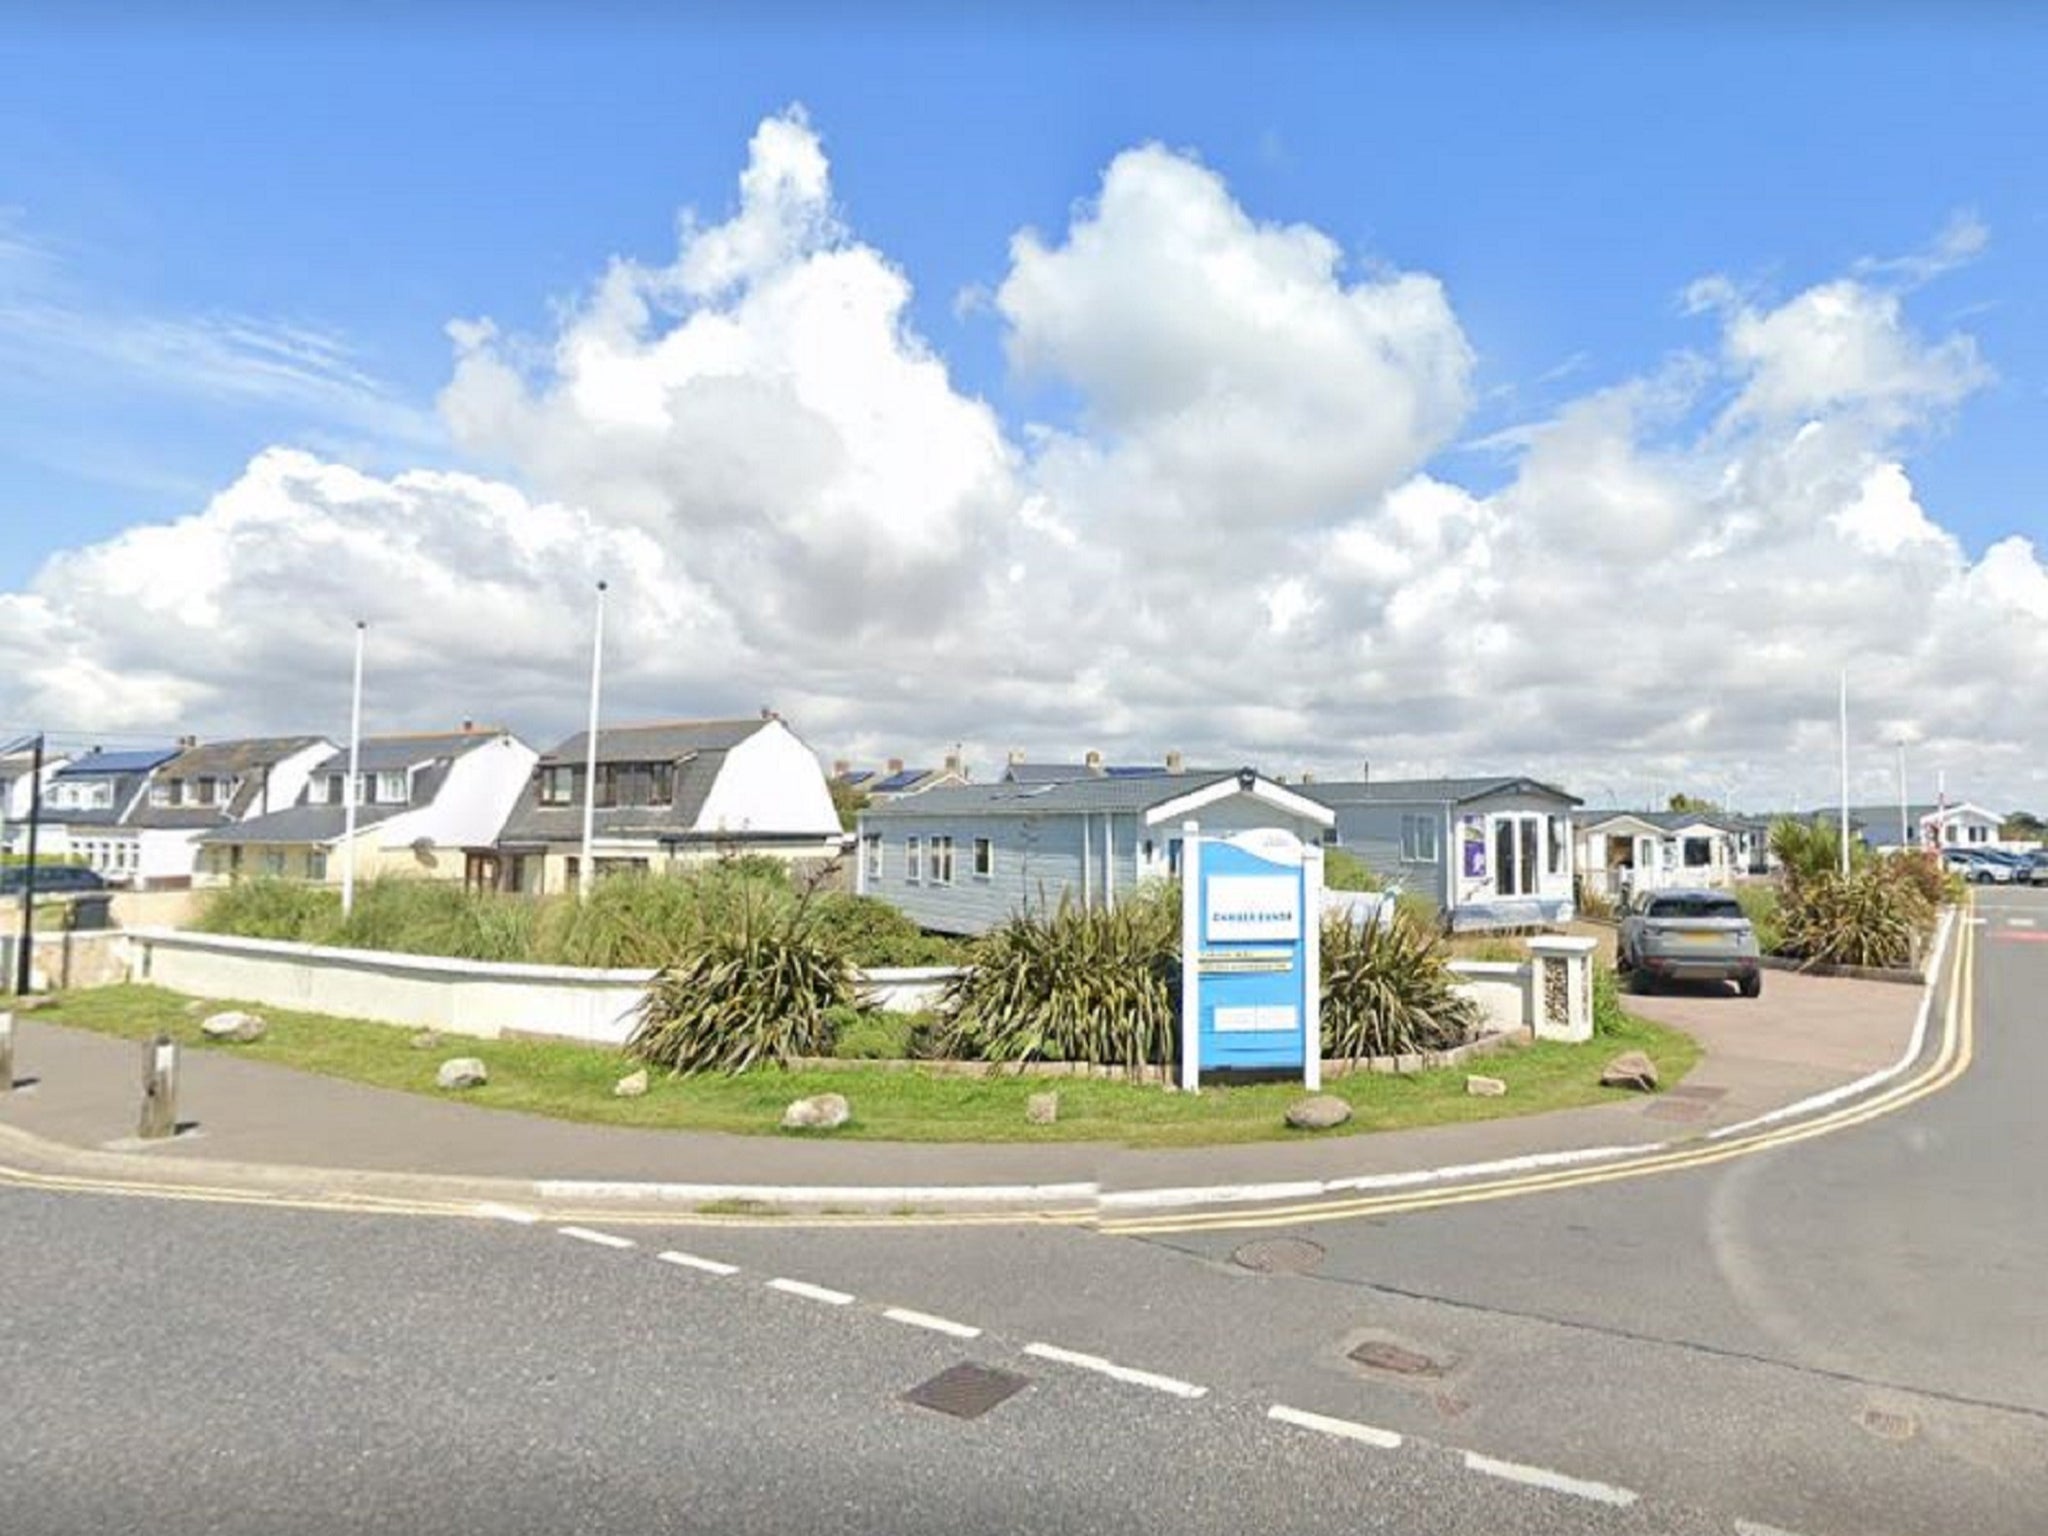 The 58-year-old man died following an altercation at a holiday park in East Sussex